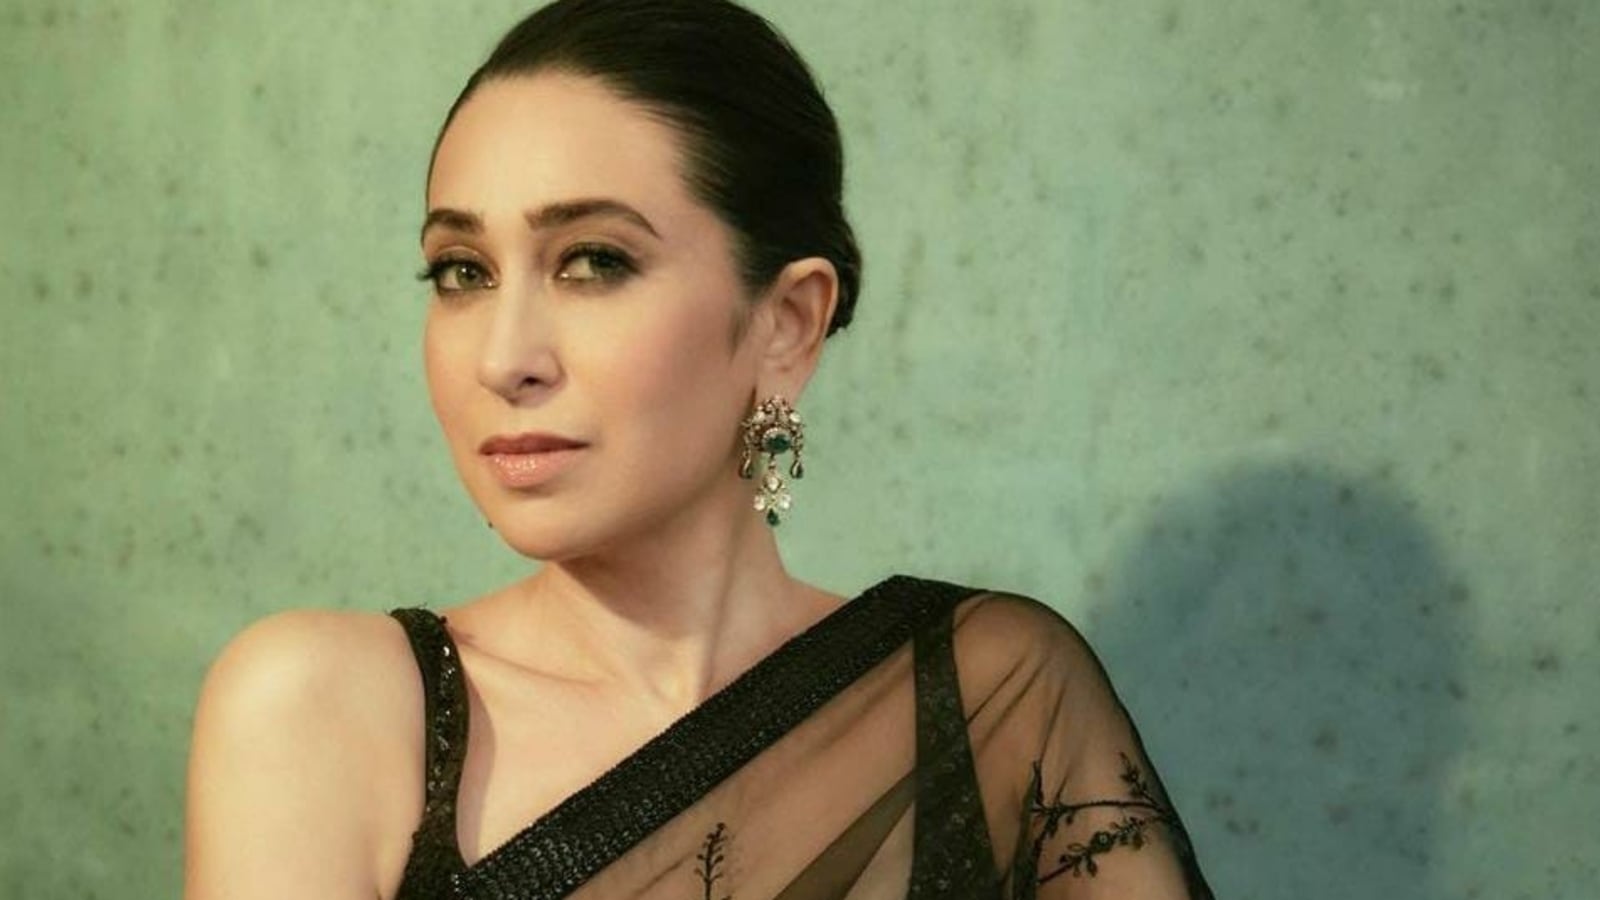 Krisma Xxx - Karisma Kapoor responds as fan asks her if she would ever get married again  | Bollywood - Hindustan Times